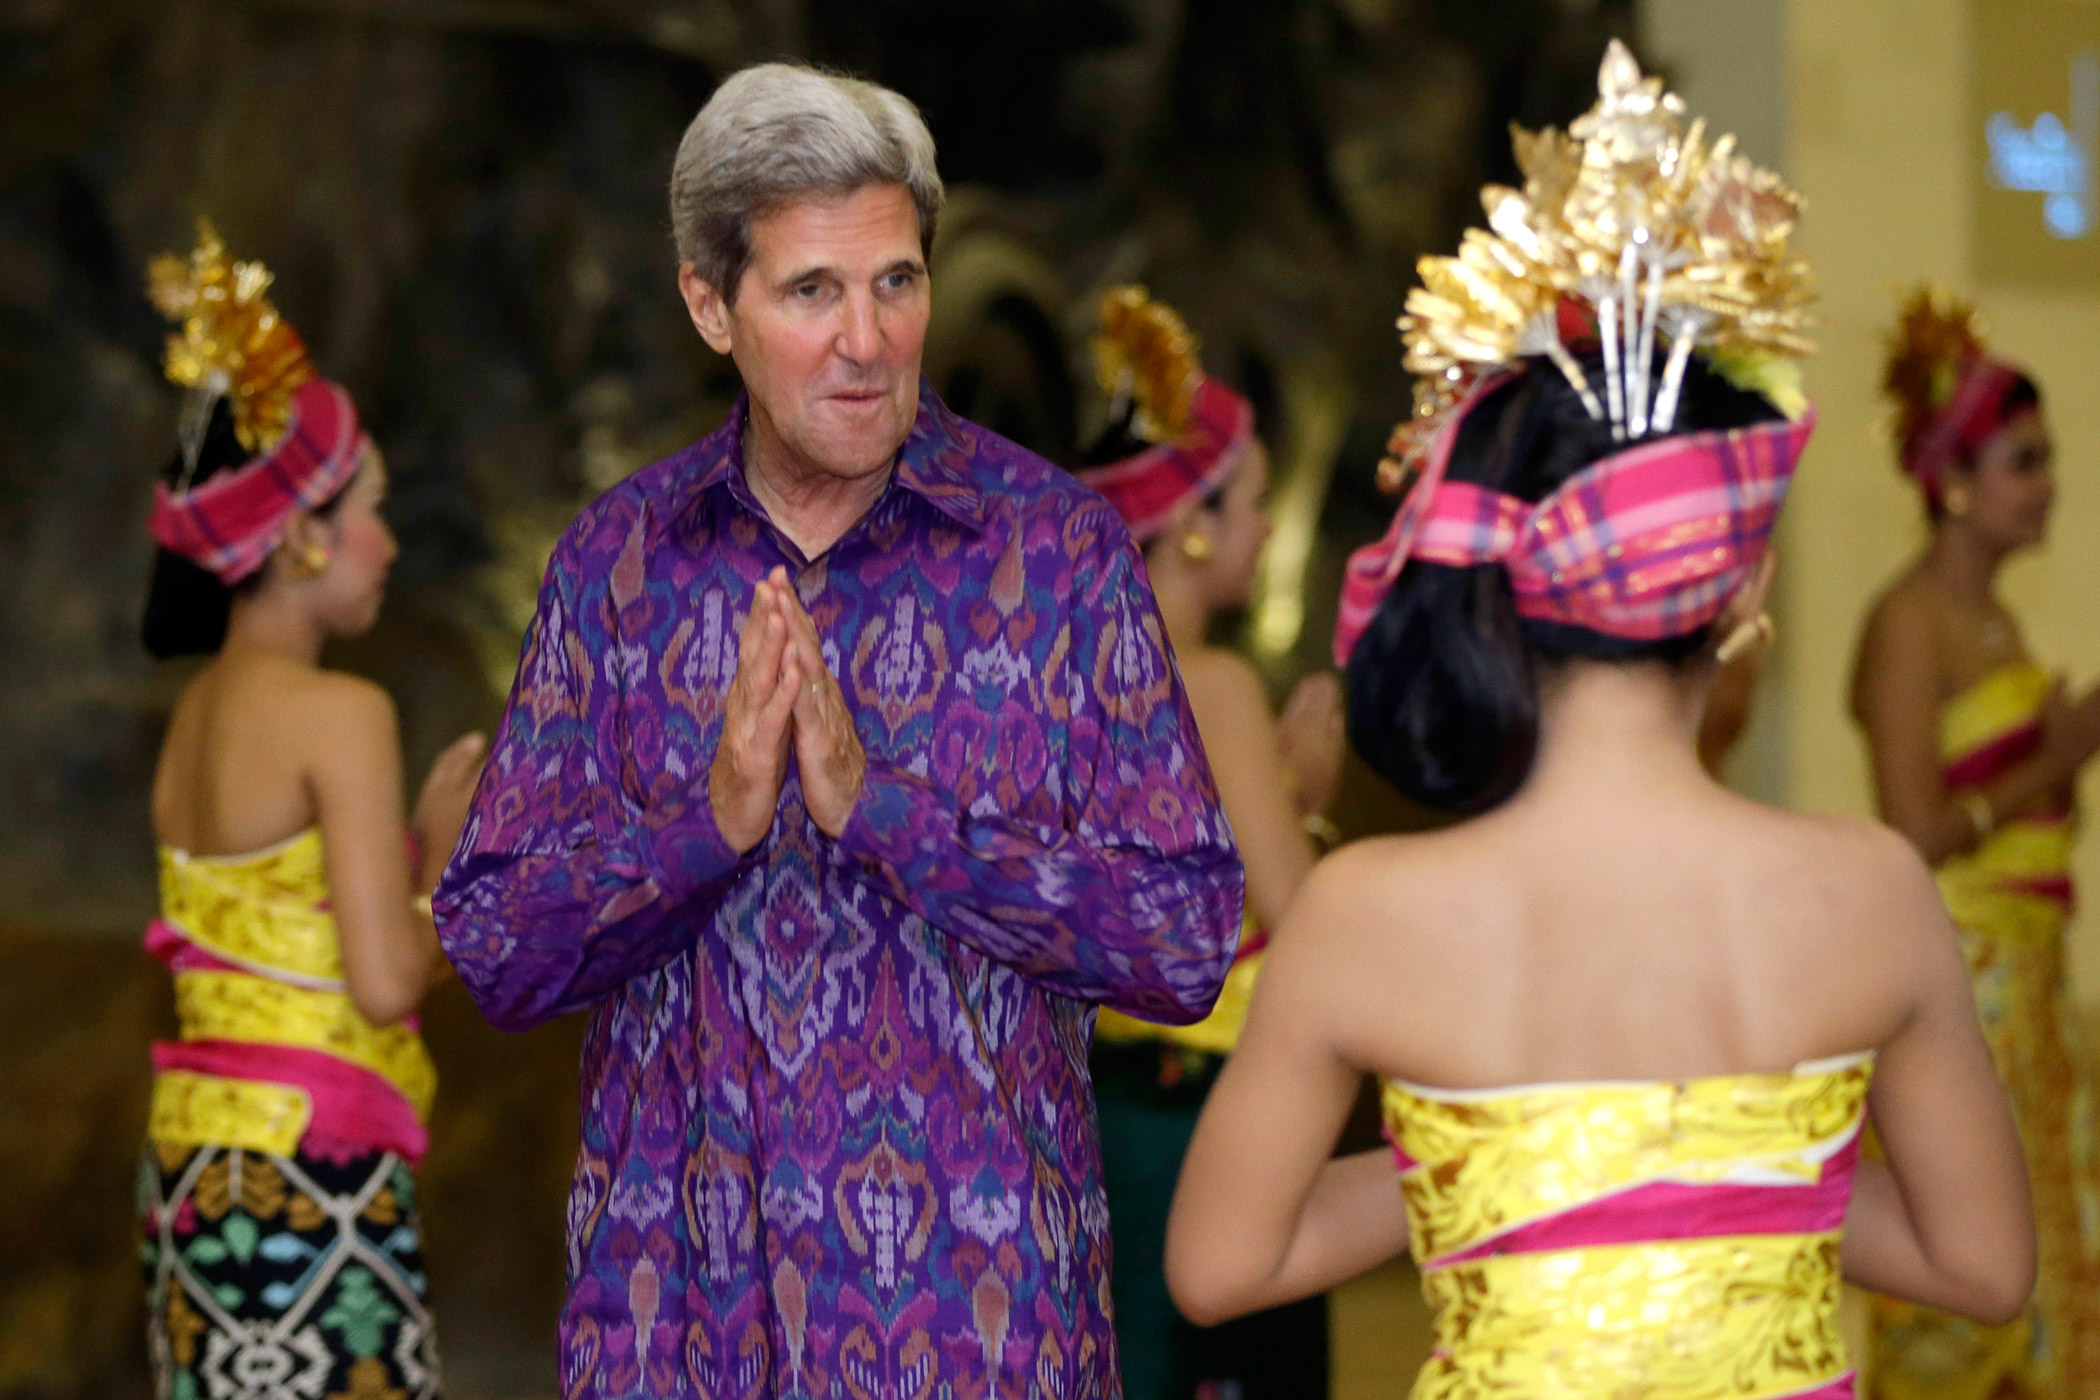 U.S. Secretary of State John Kerry, wearing a traditional Balinese woven fabric called an  endek,  arrives at a gala for the leaders at the APEC Summit in Nusa Dua on the Indonesian resort island of Bali on Oct. 7, 2013.